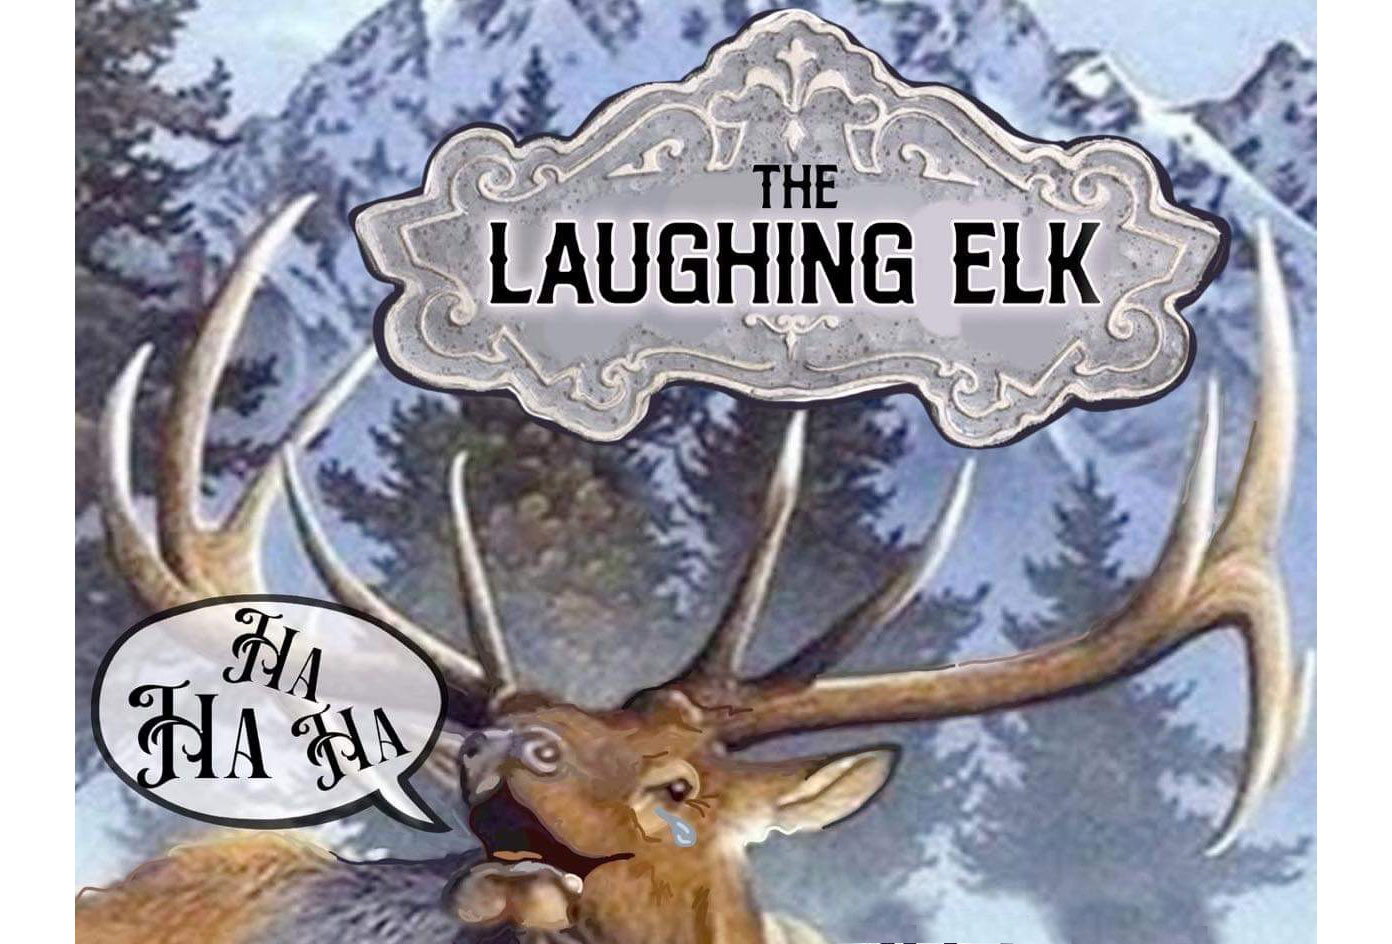 Laughing Elk Comedy Night with Thomas Nichols